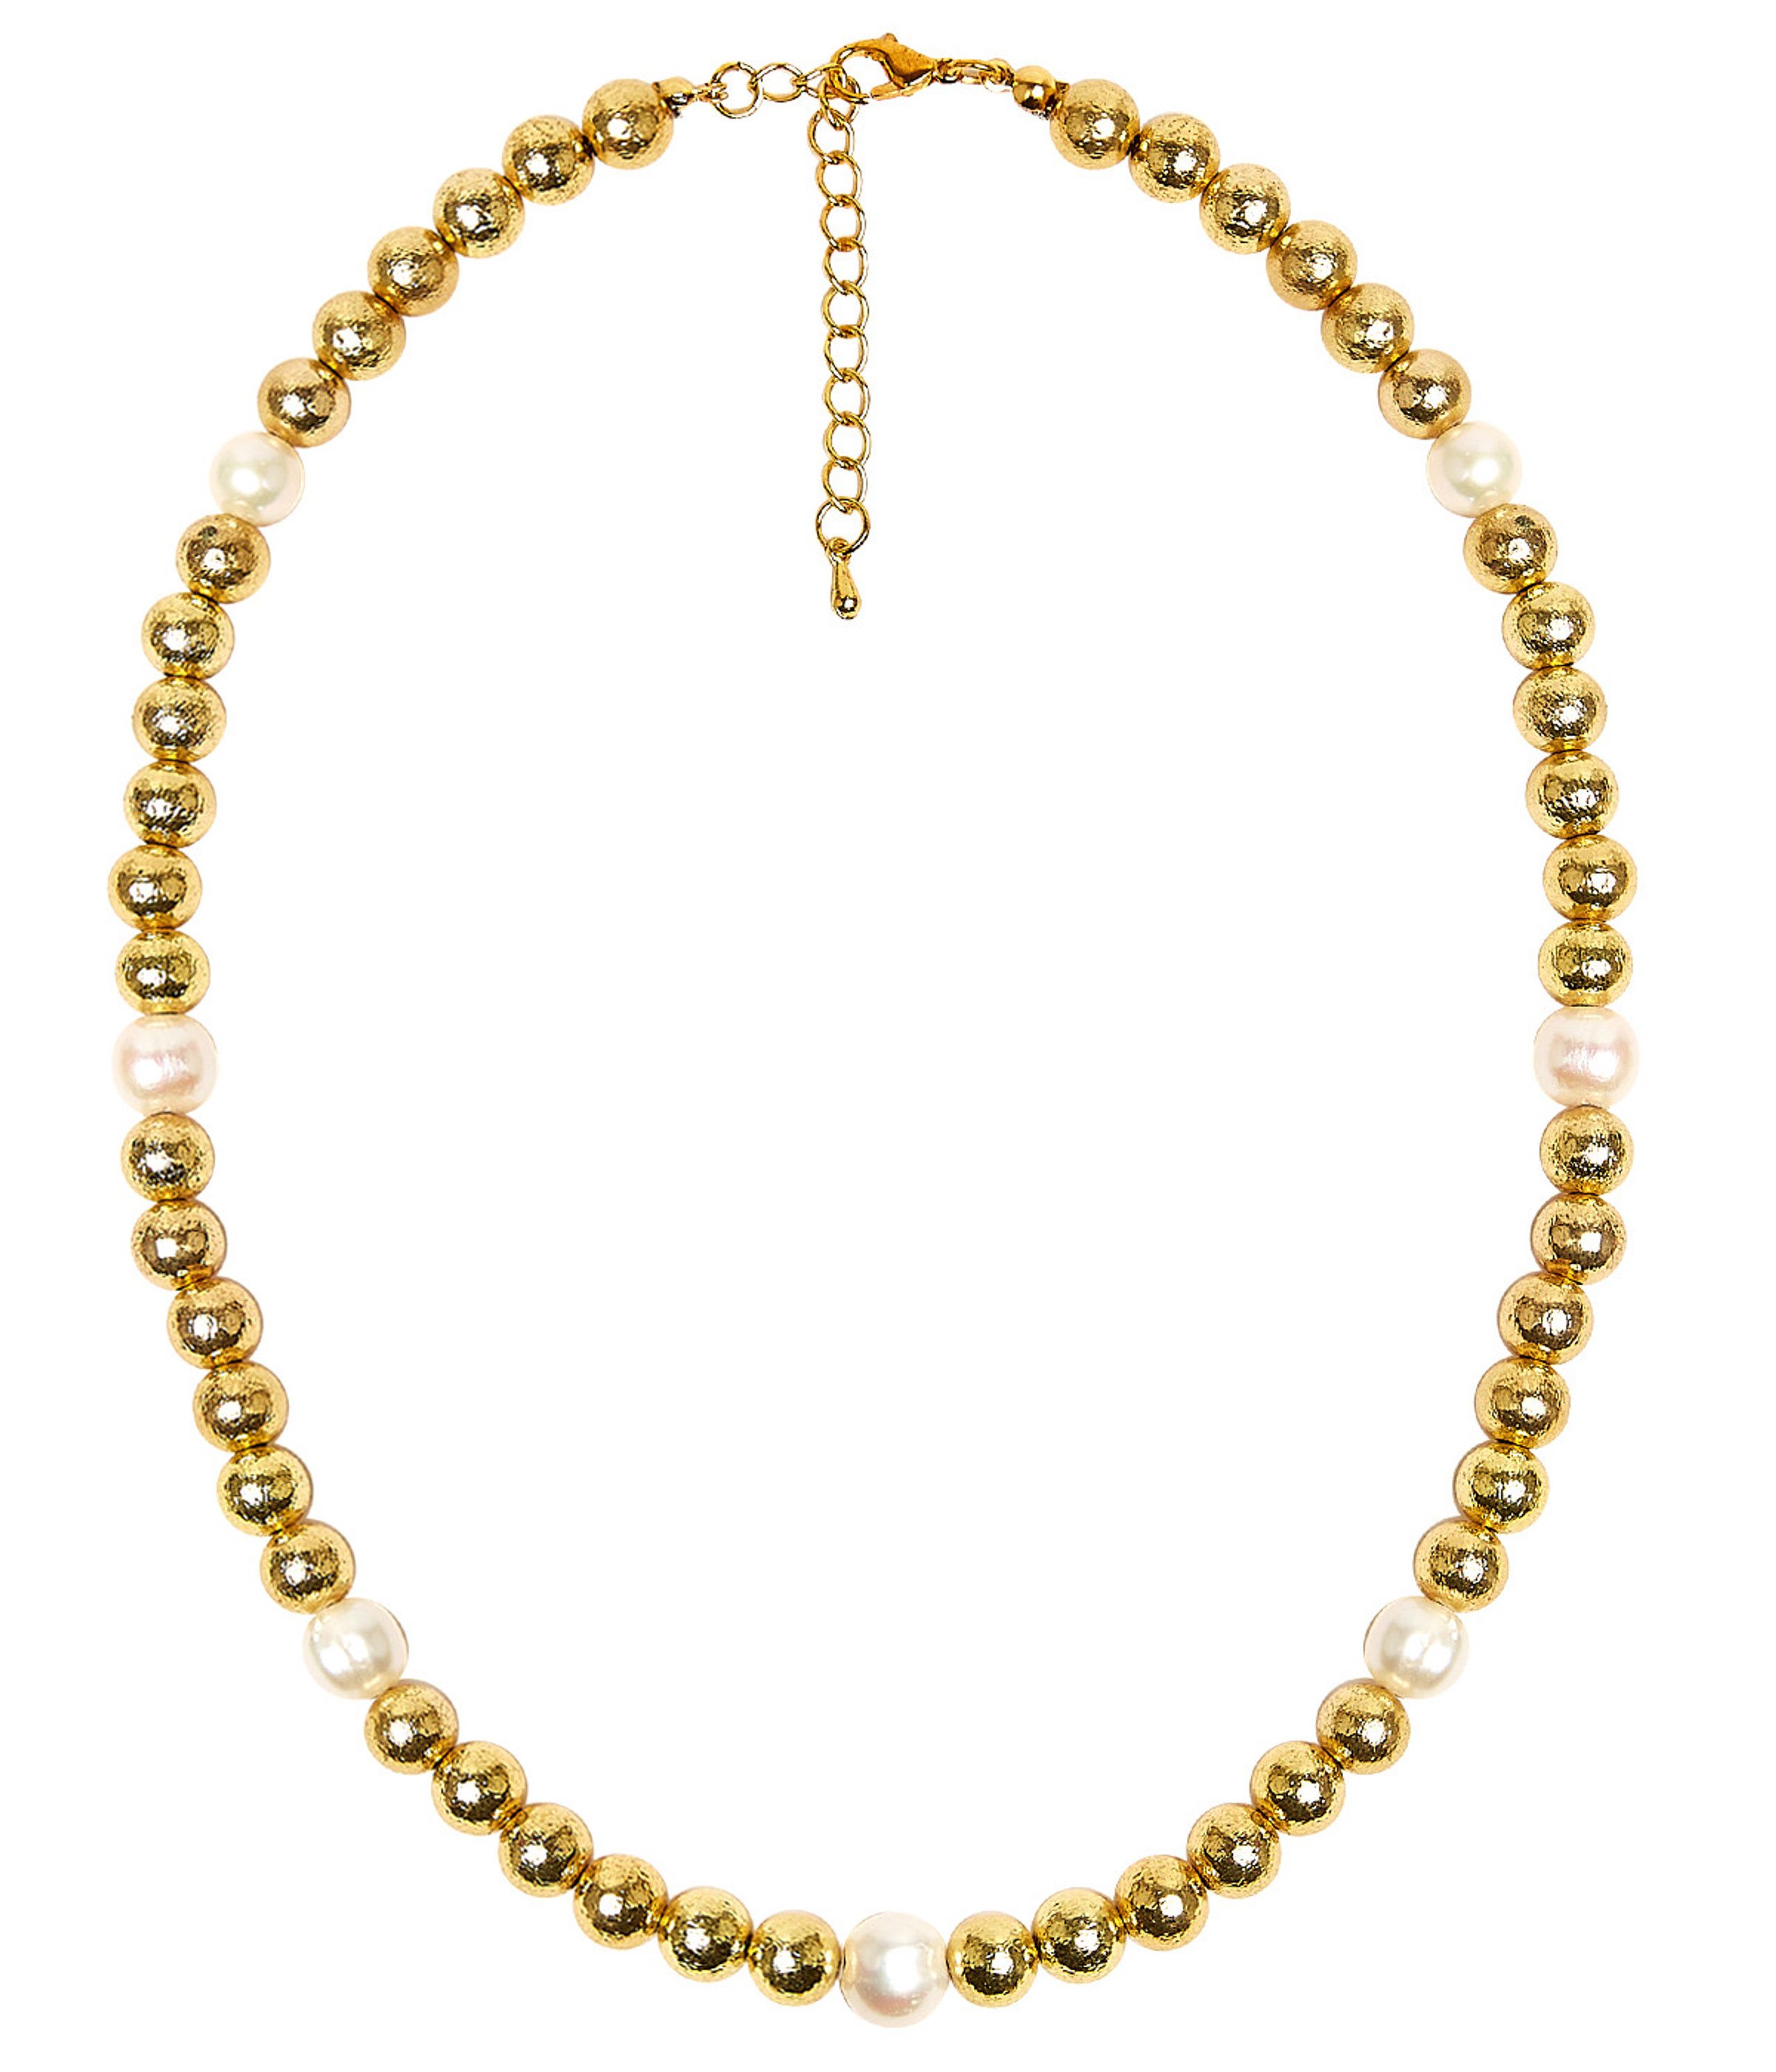 Diana Single Strand Beaded Necklace 10mm - Brushed Gold and Freshwater Pearl | Lisi Lerch Inc